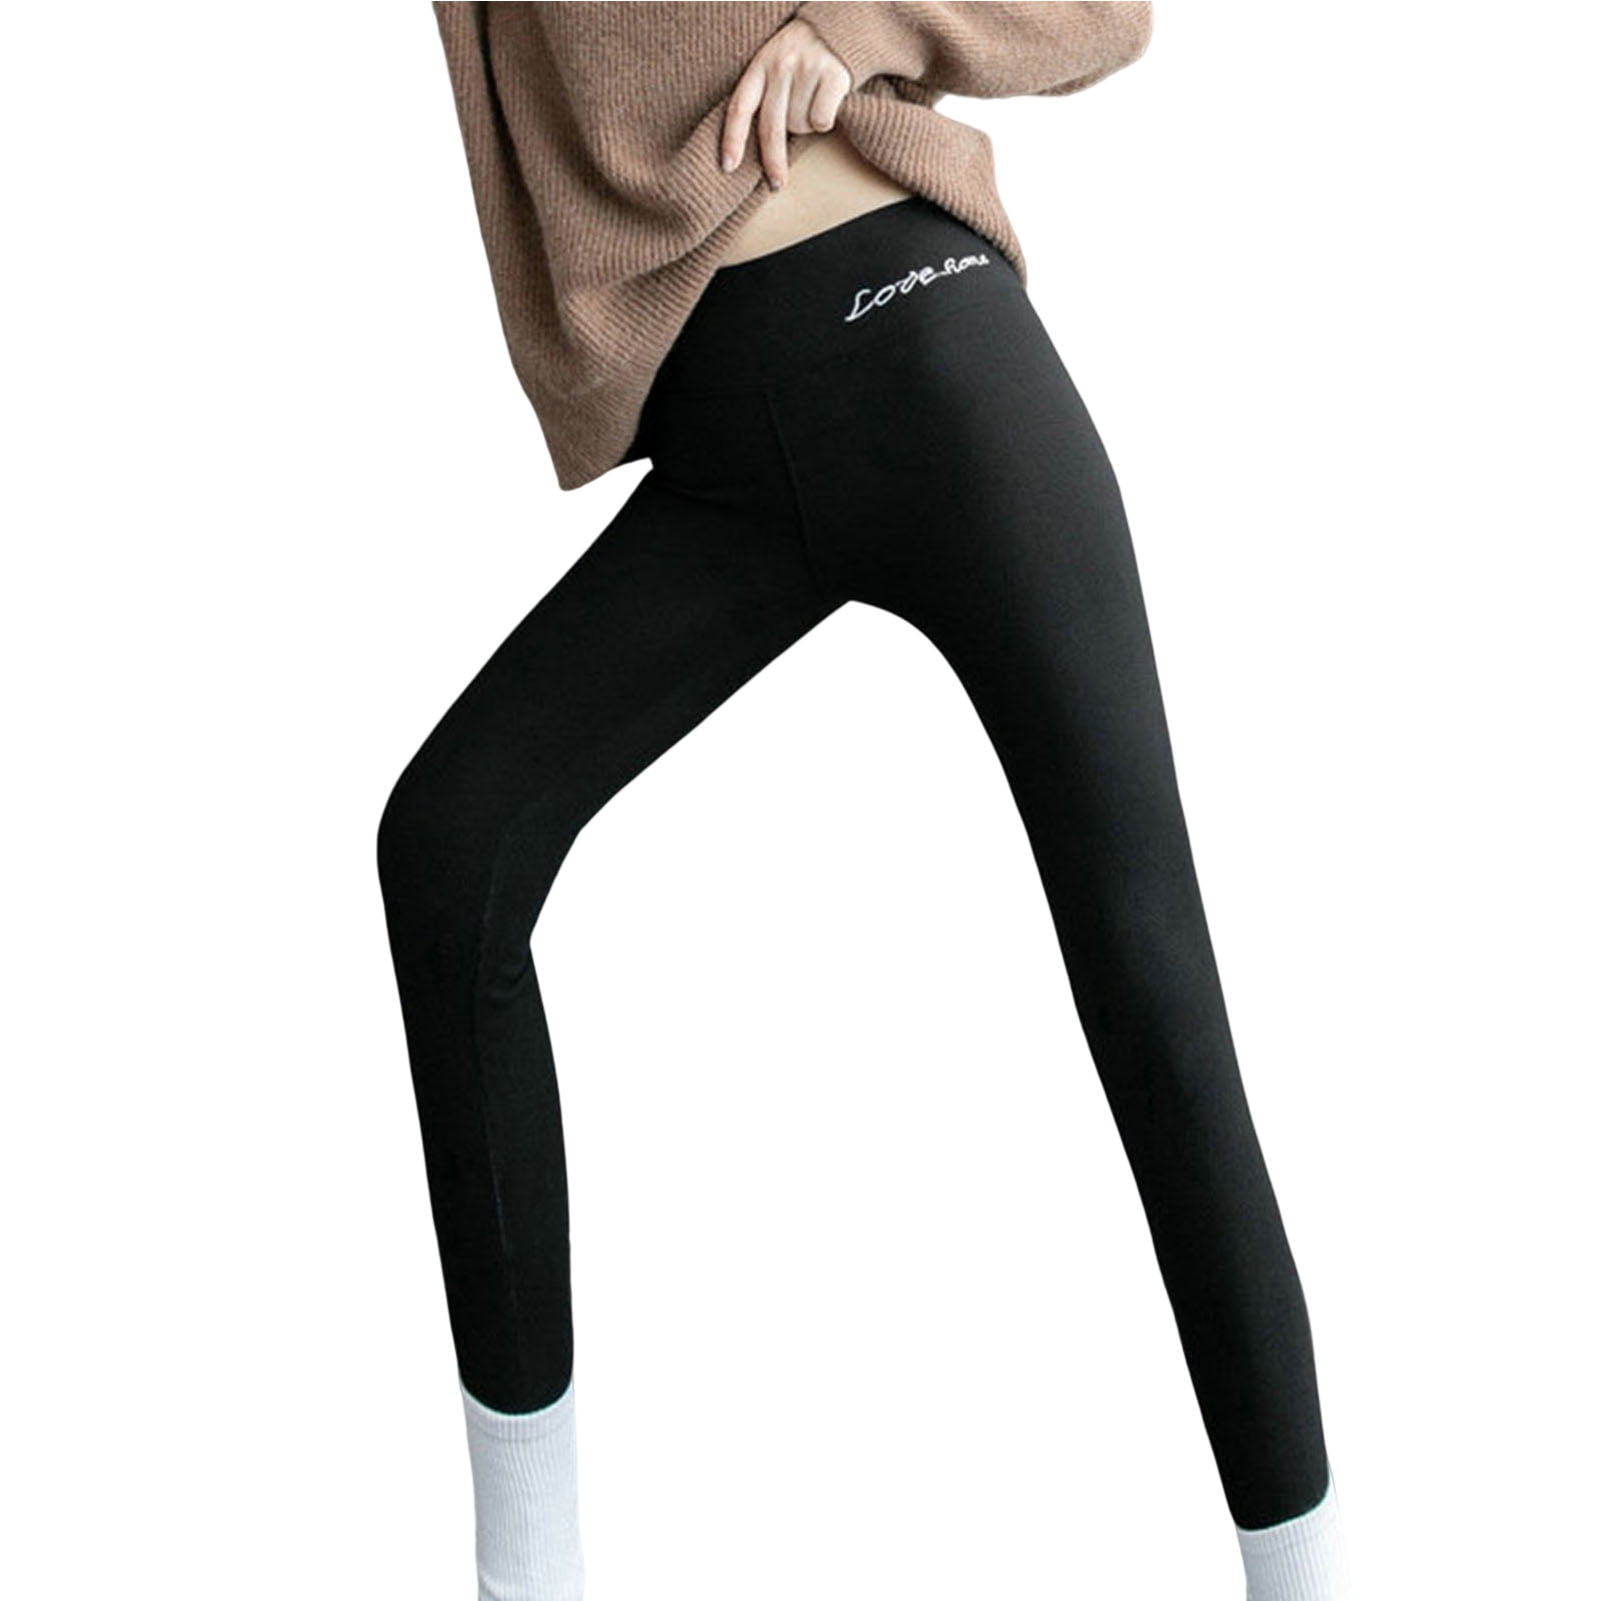 Velvet Winter Girls Fleece Lined Leggings For Women Thick, Cold Resistant,  Soft, And Elastic With Lamb Cashmere Bodycon Lining From Jacky0817, $12.3